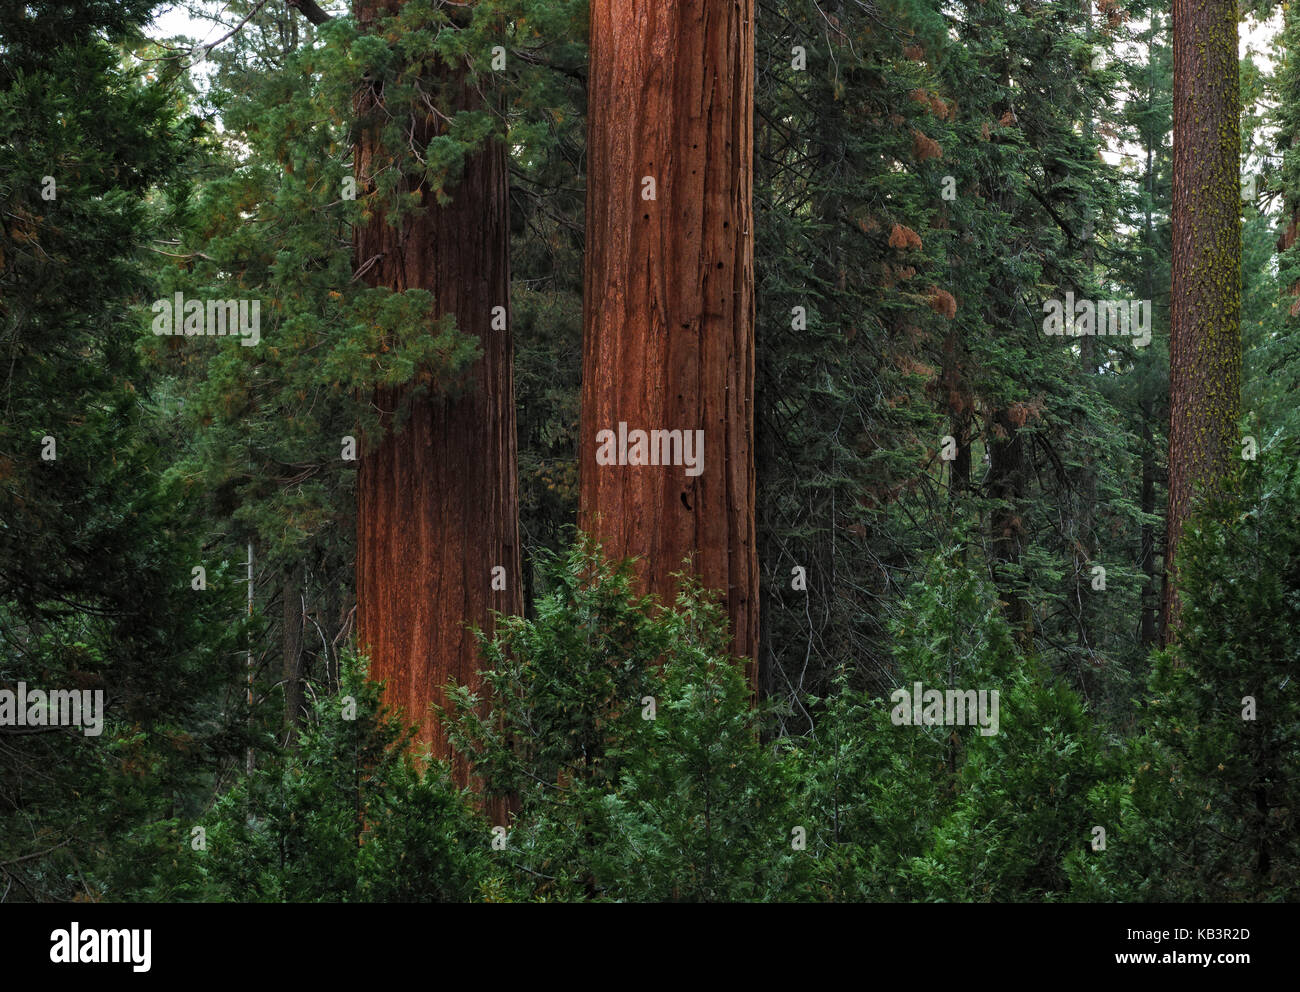 Riesige rote Holz in Kings Canyon National Park, Kalifornien, USA Stockfoto